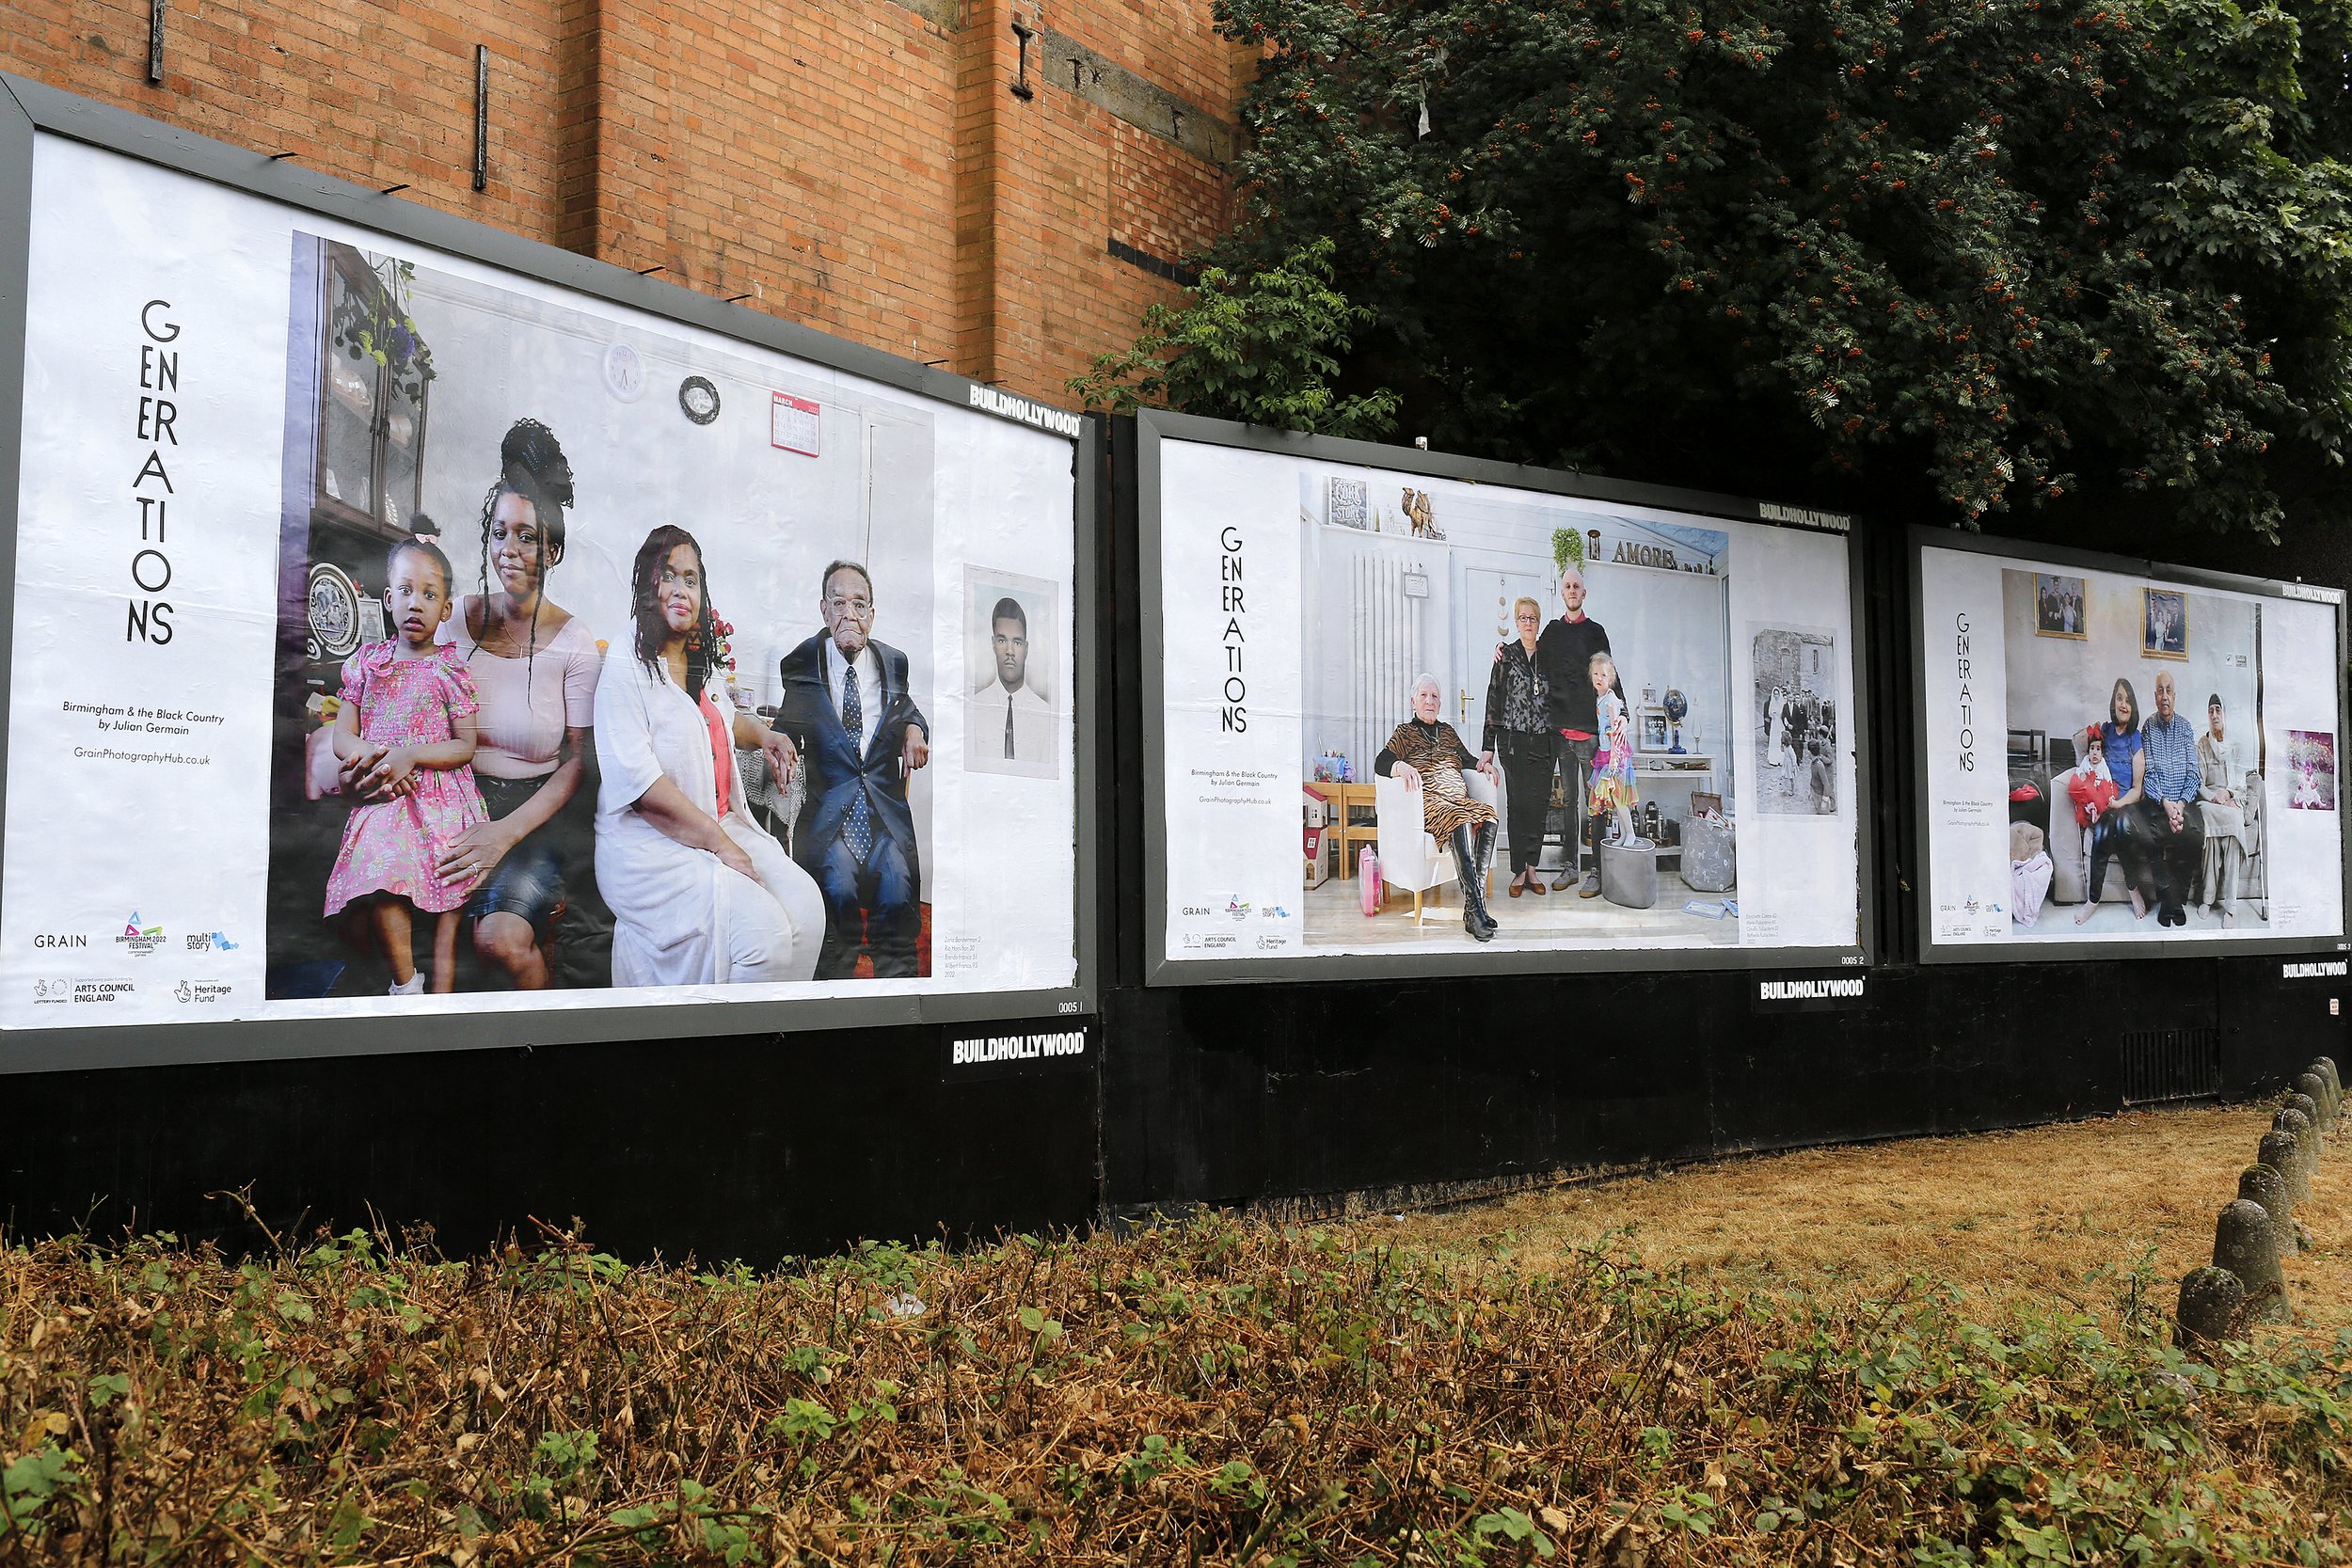  ‘GENERATIONS Birmingham &amp; The Black Country’, by Julian Germain, part of Birmingham 2022 Festival in partnership with Multistory. 2022 